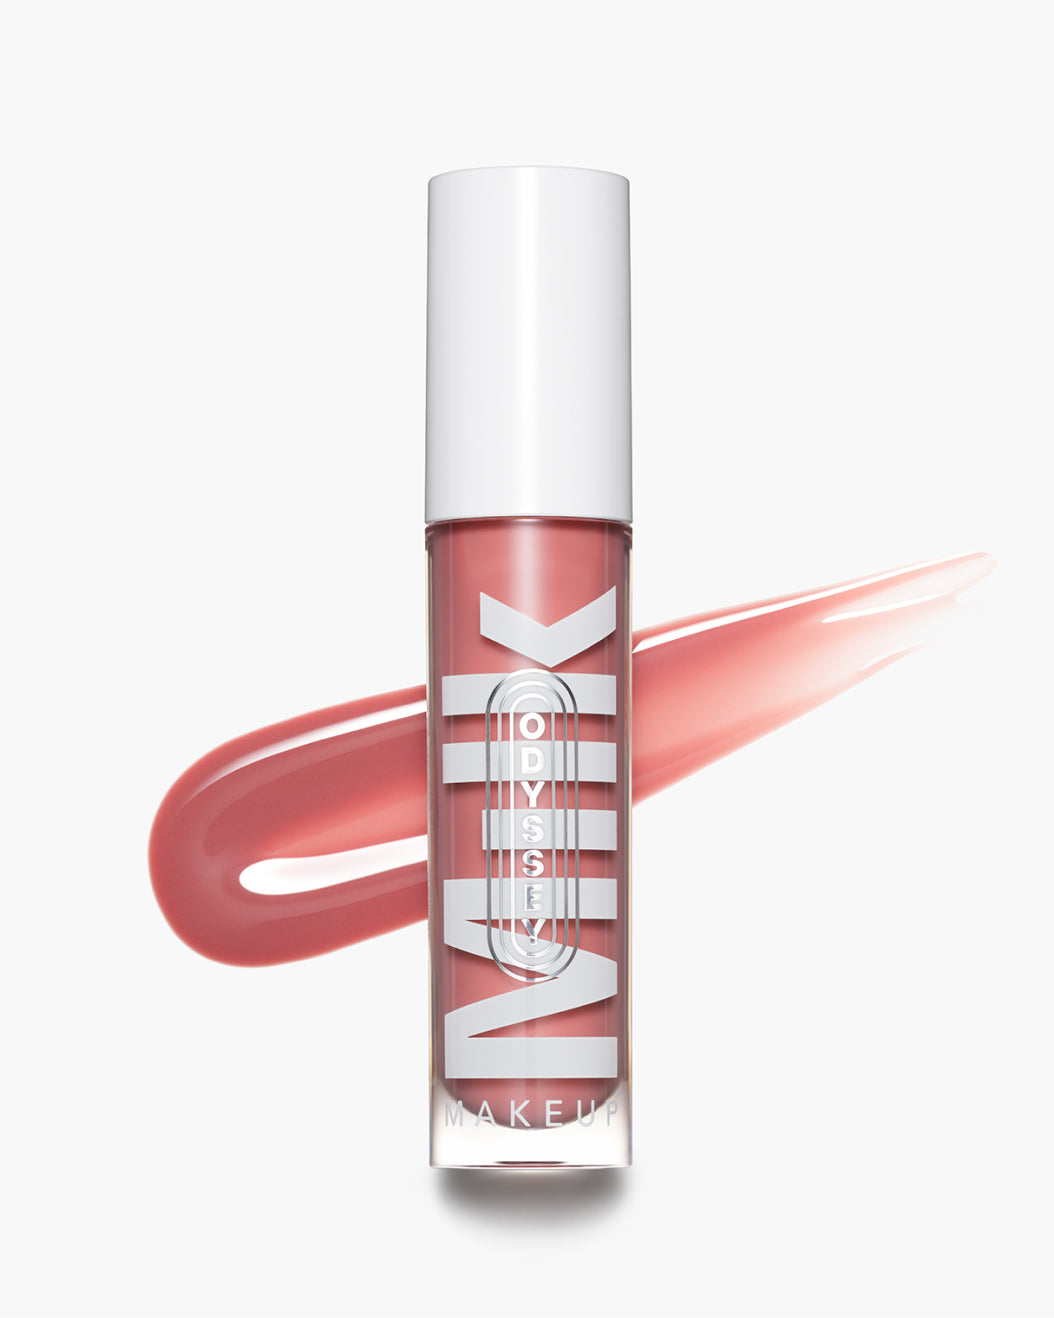 Product shot of Odyssey Lip Oil Gloss in Werk with a swipe behind it on a white background